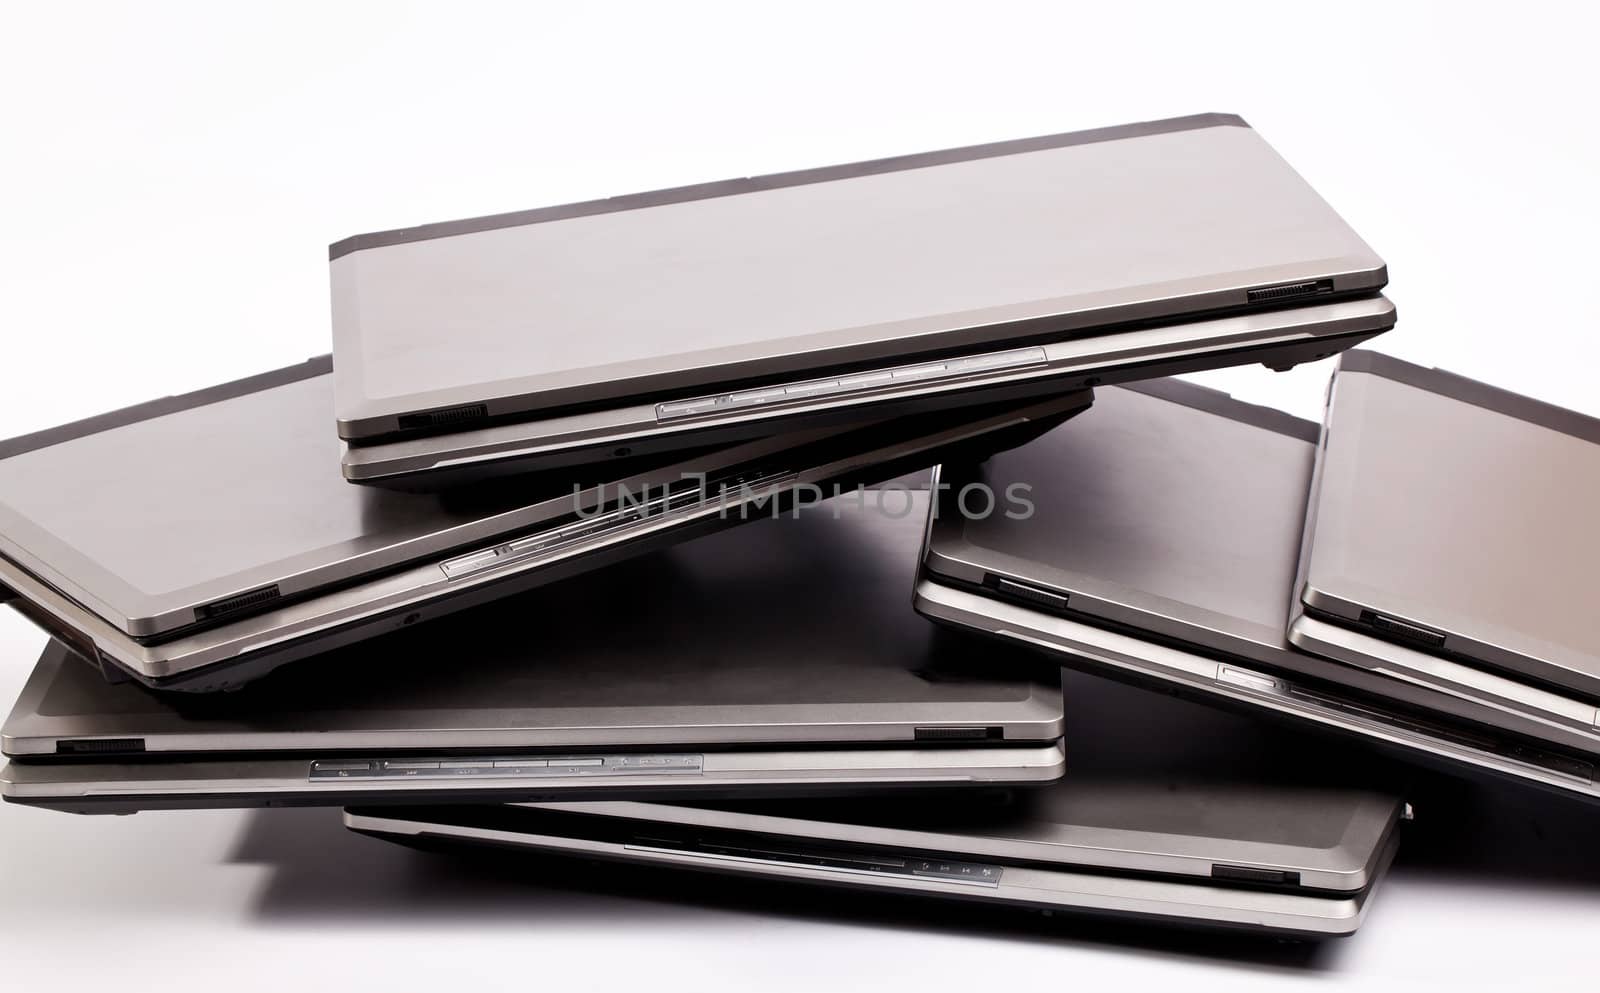 Pile of laptops by RawGroup